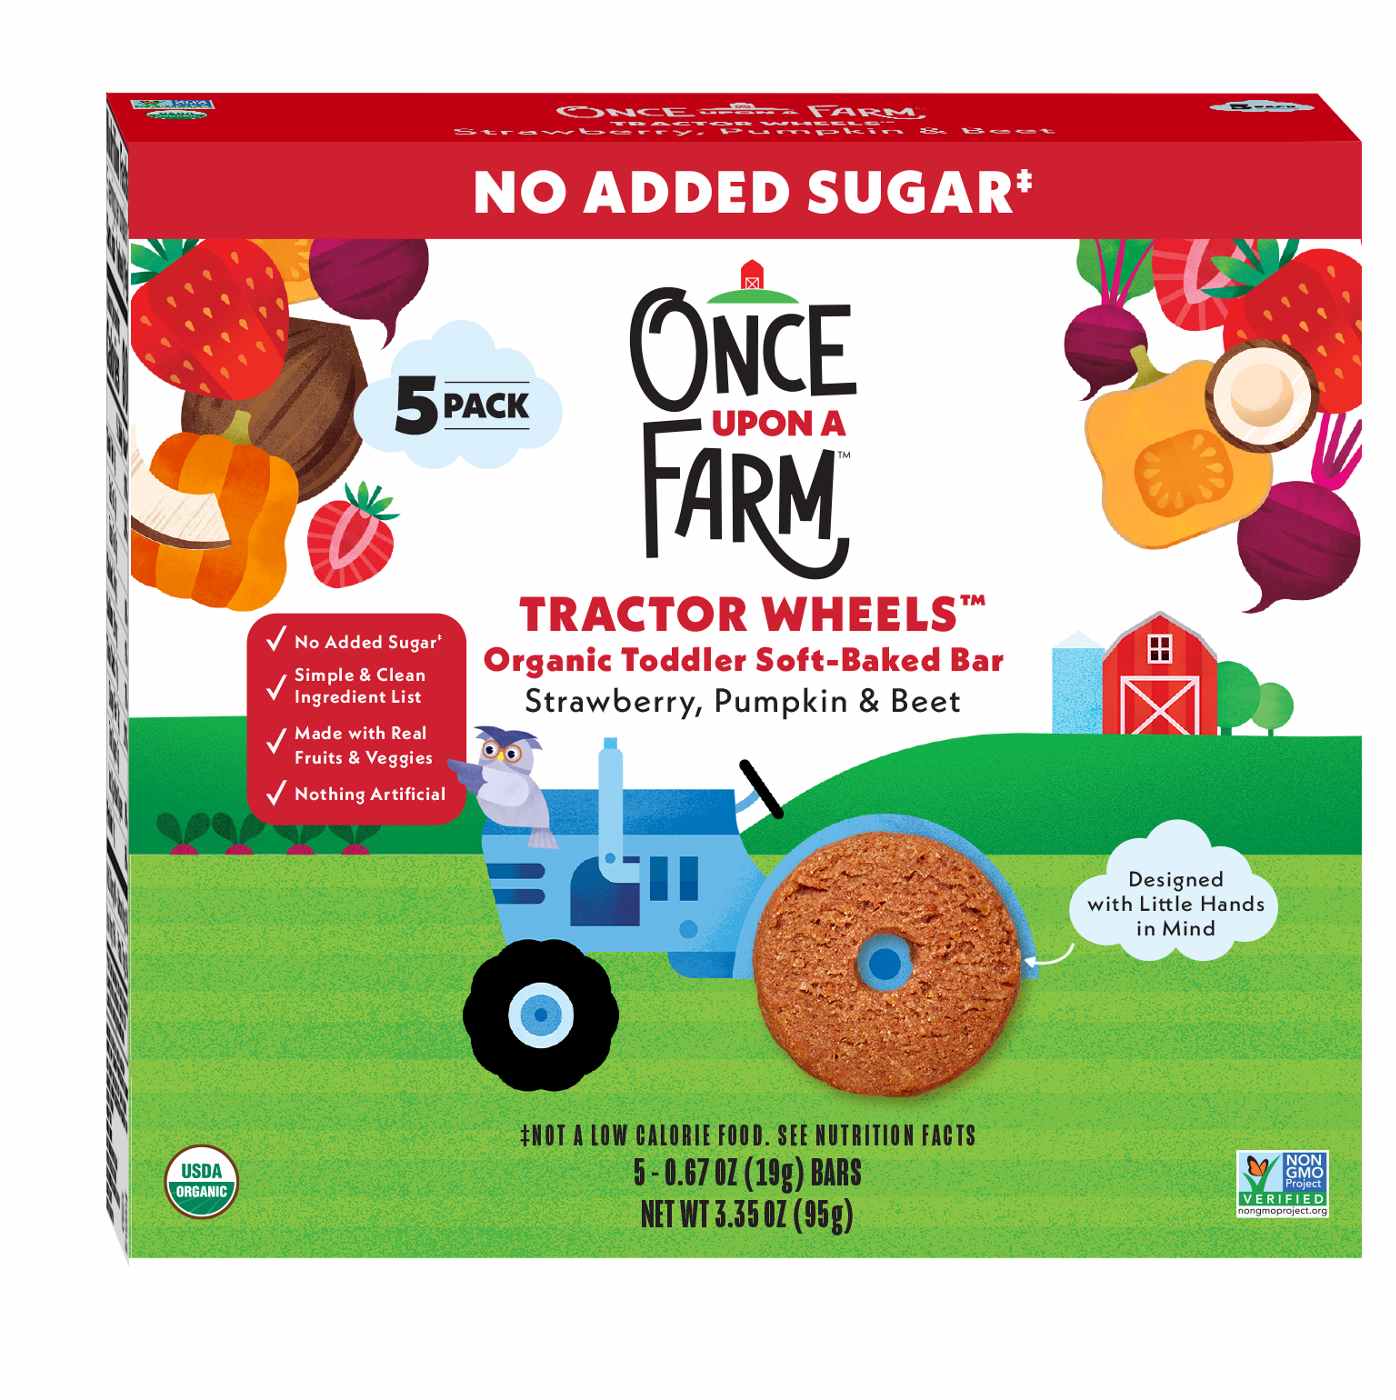 Once Upon a Farm Tractor Wheels Organic Toddler Soft-Baked Bar - Strawberry, Pumpkin & Beet; image 1 of 2